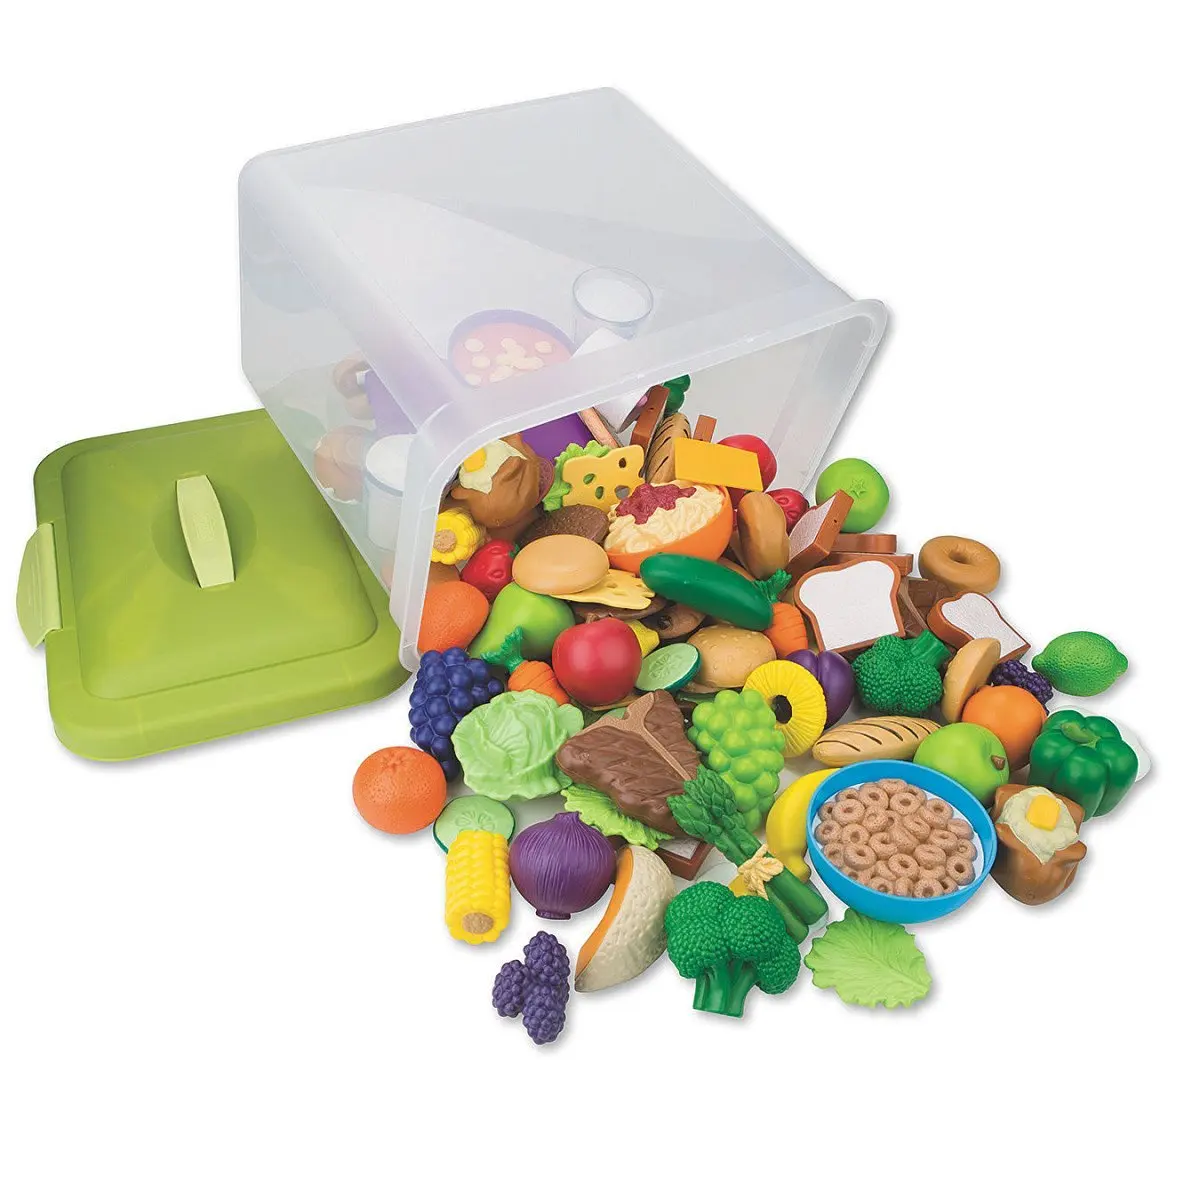 new sprouts classroom play food set